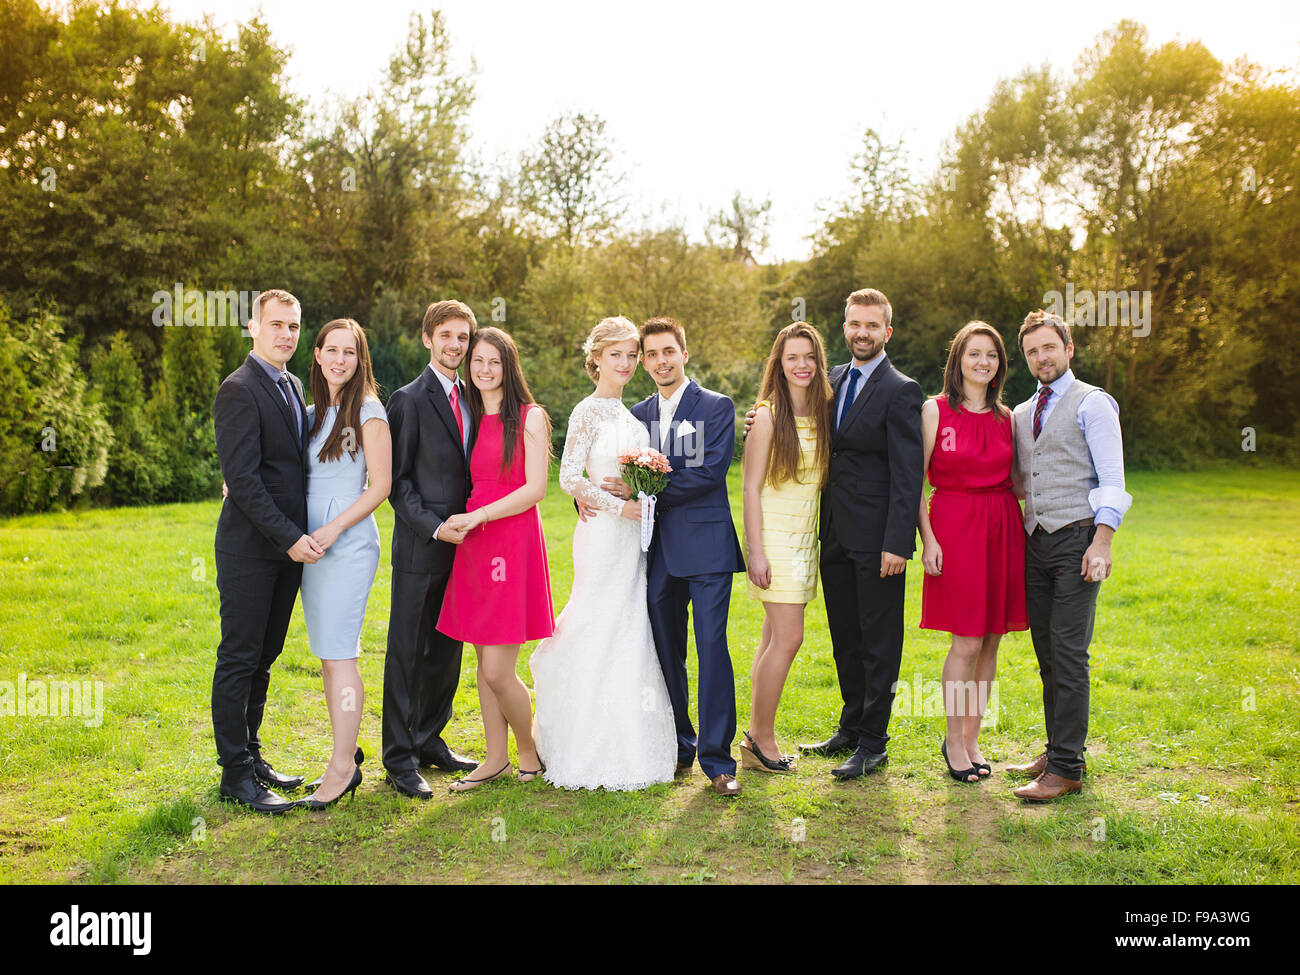 Full Length Portrait Of Newlywed Couple Posing With Bridesmaids And Groomsmen In Green Sunny 1103